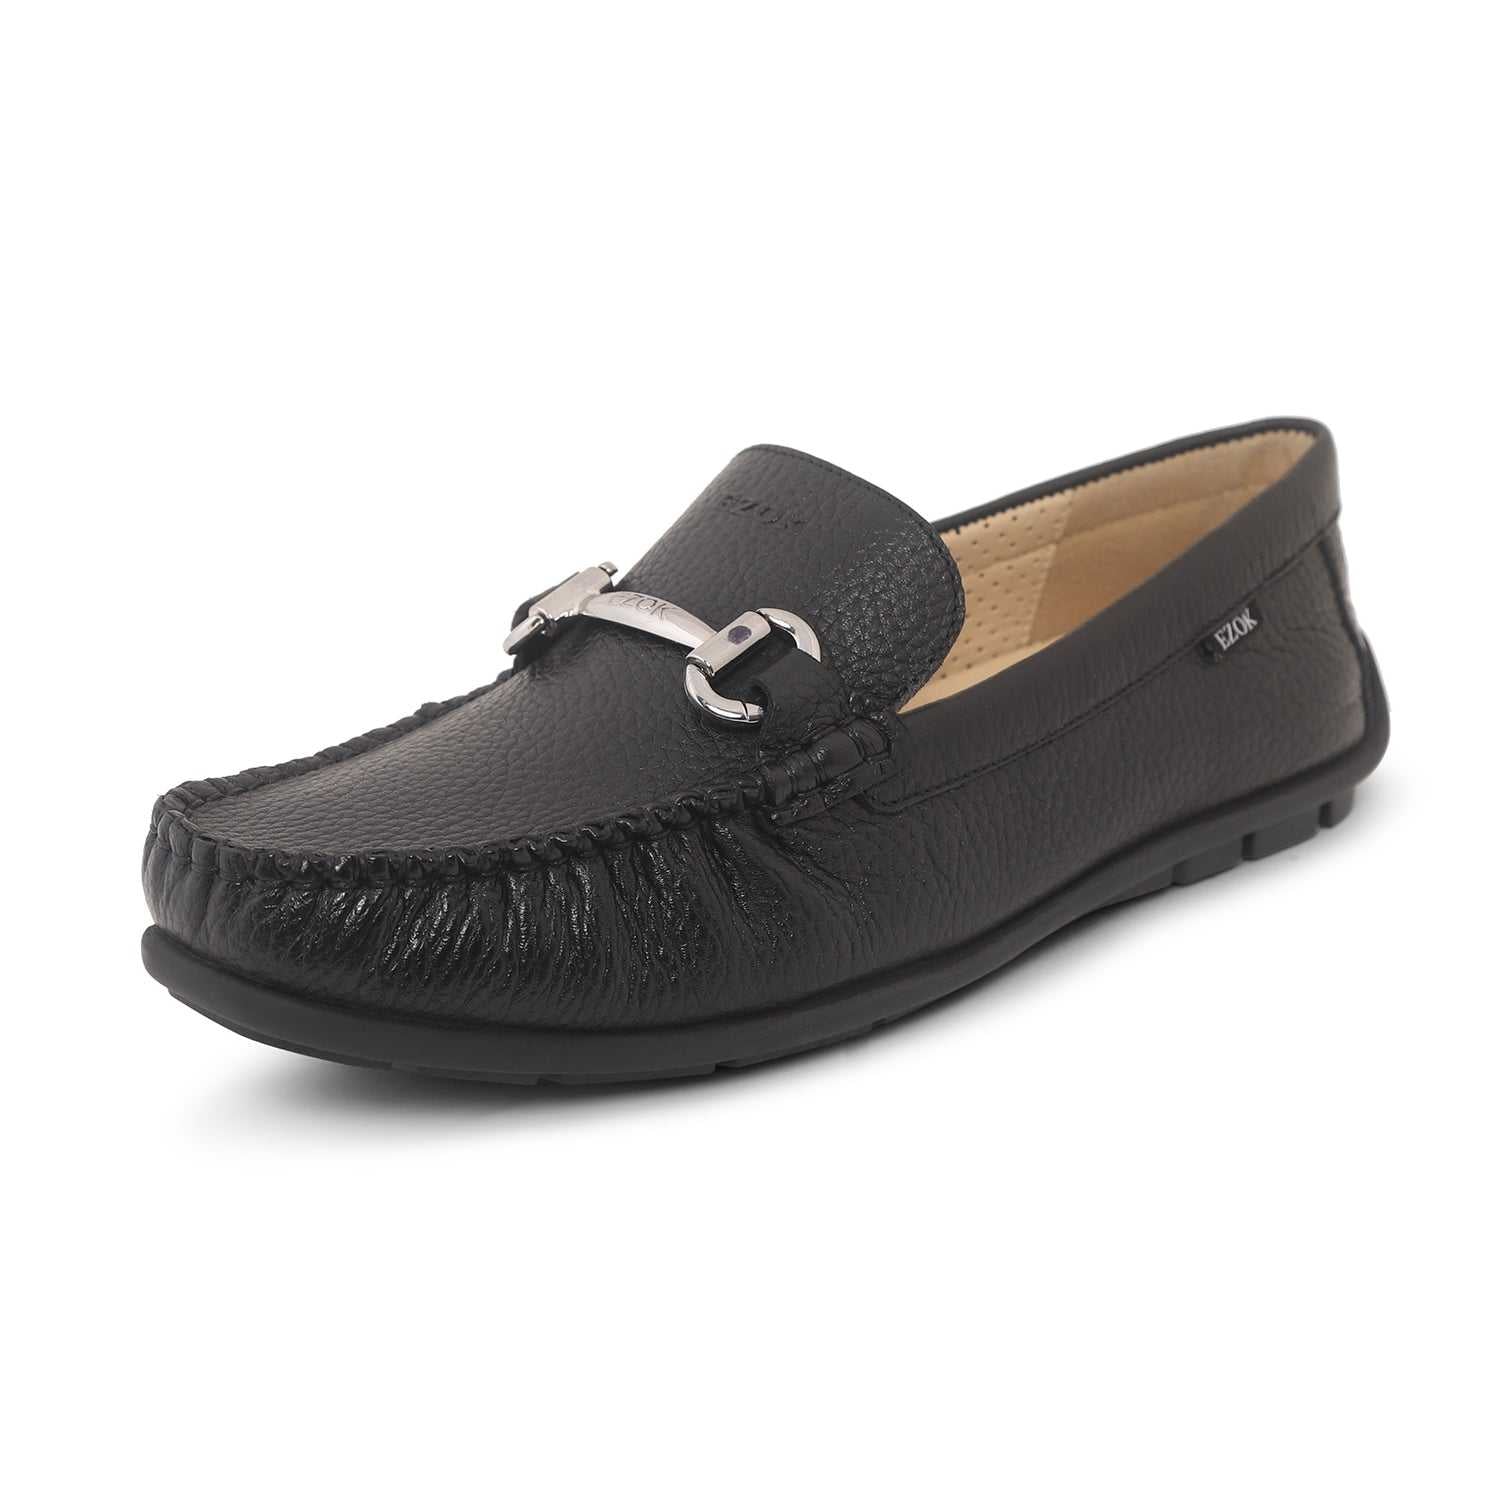 Ezok Mens Black Moccasin Driving Leather Loafers